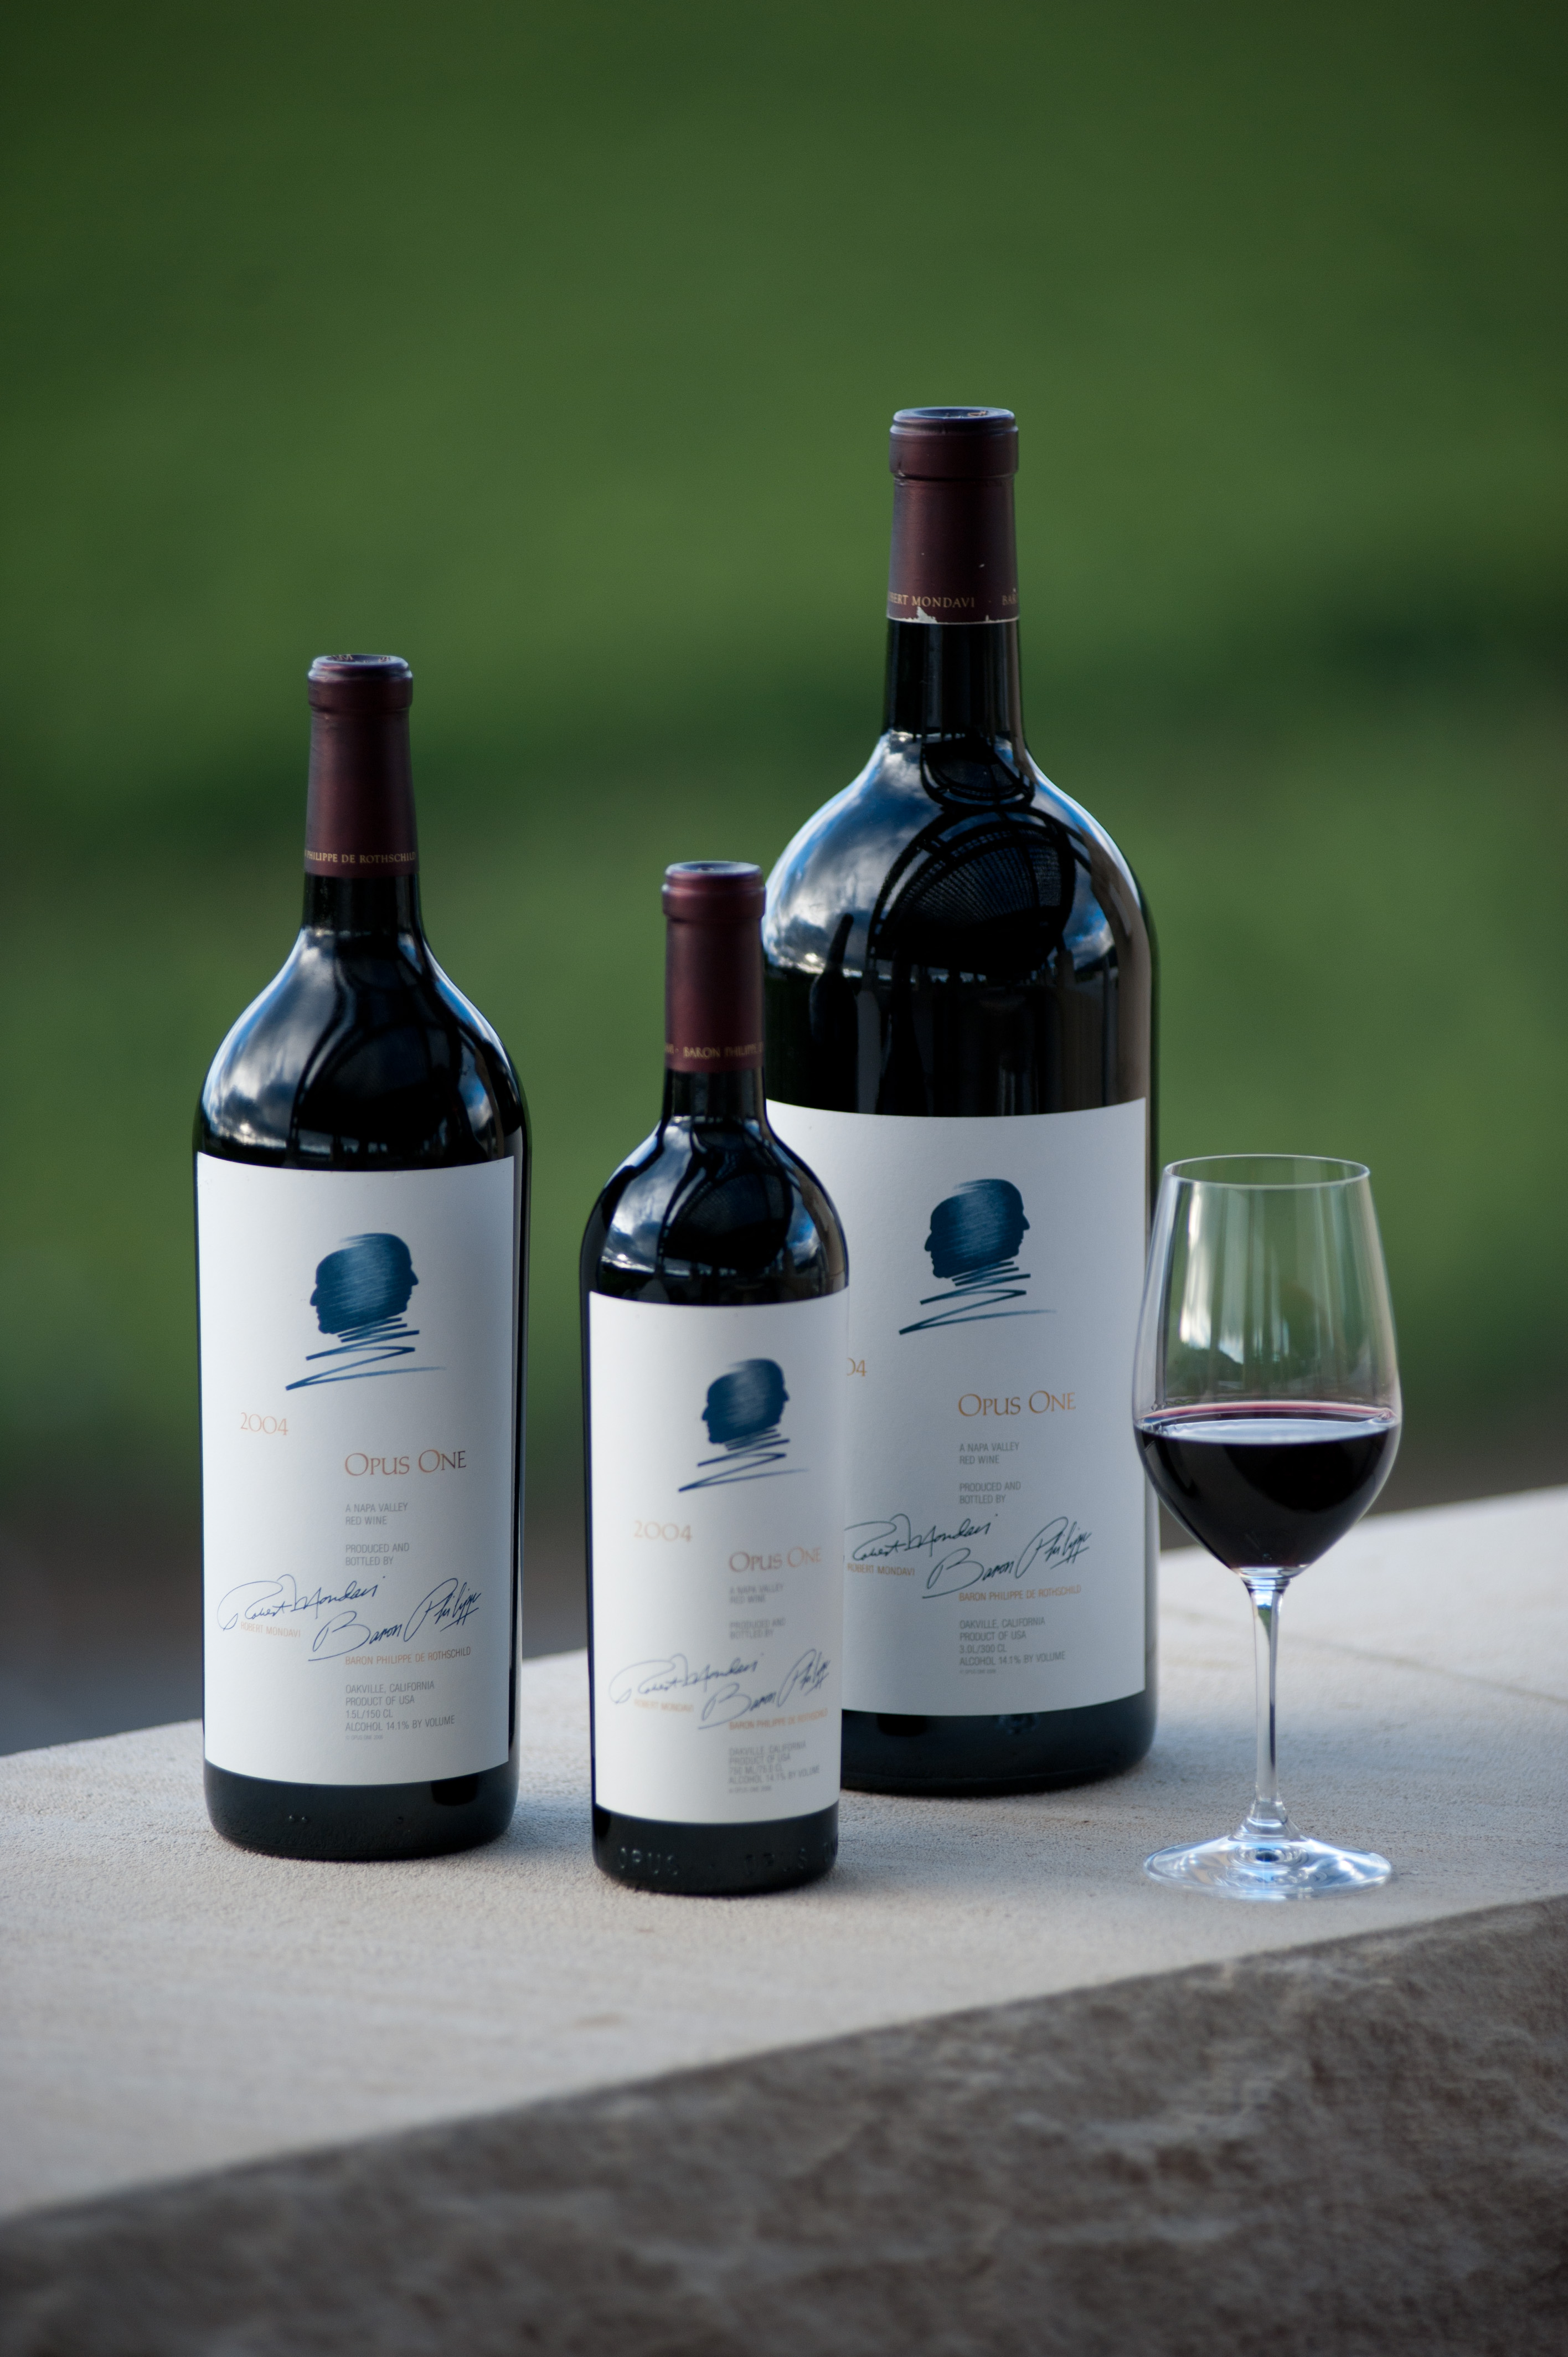 opus one 2005 cost